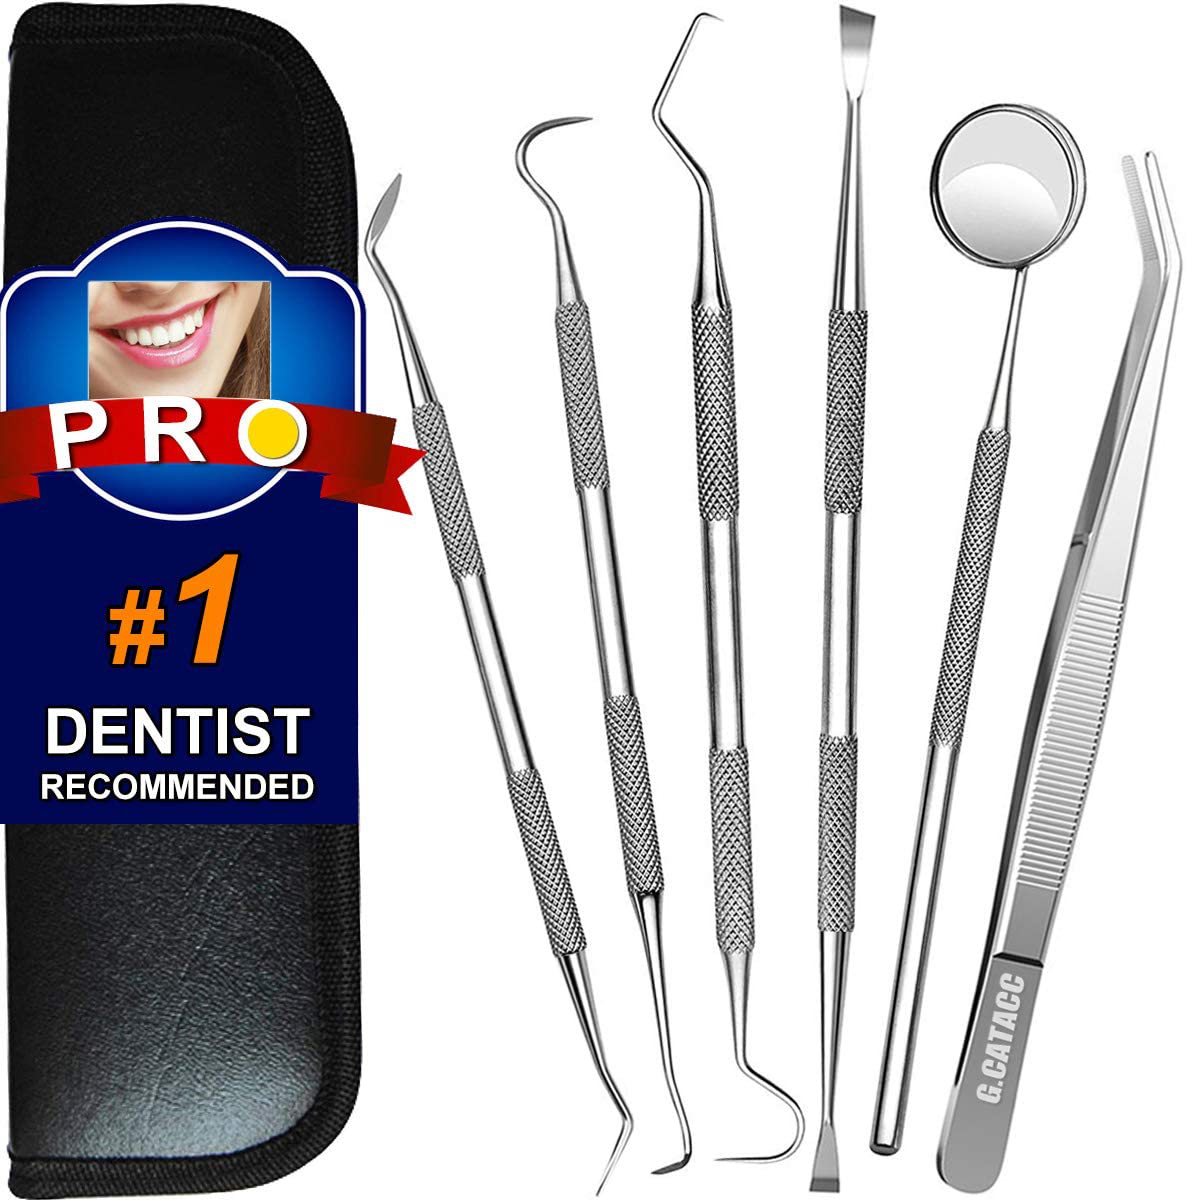 Dental Tools Plaque Remover for Teeth Professional Dental Hygiene Cleaning Kit Stainless Steel Tooth Scraper Plaque Tartar Remover Cleaner Dental